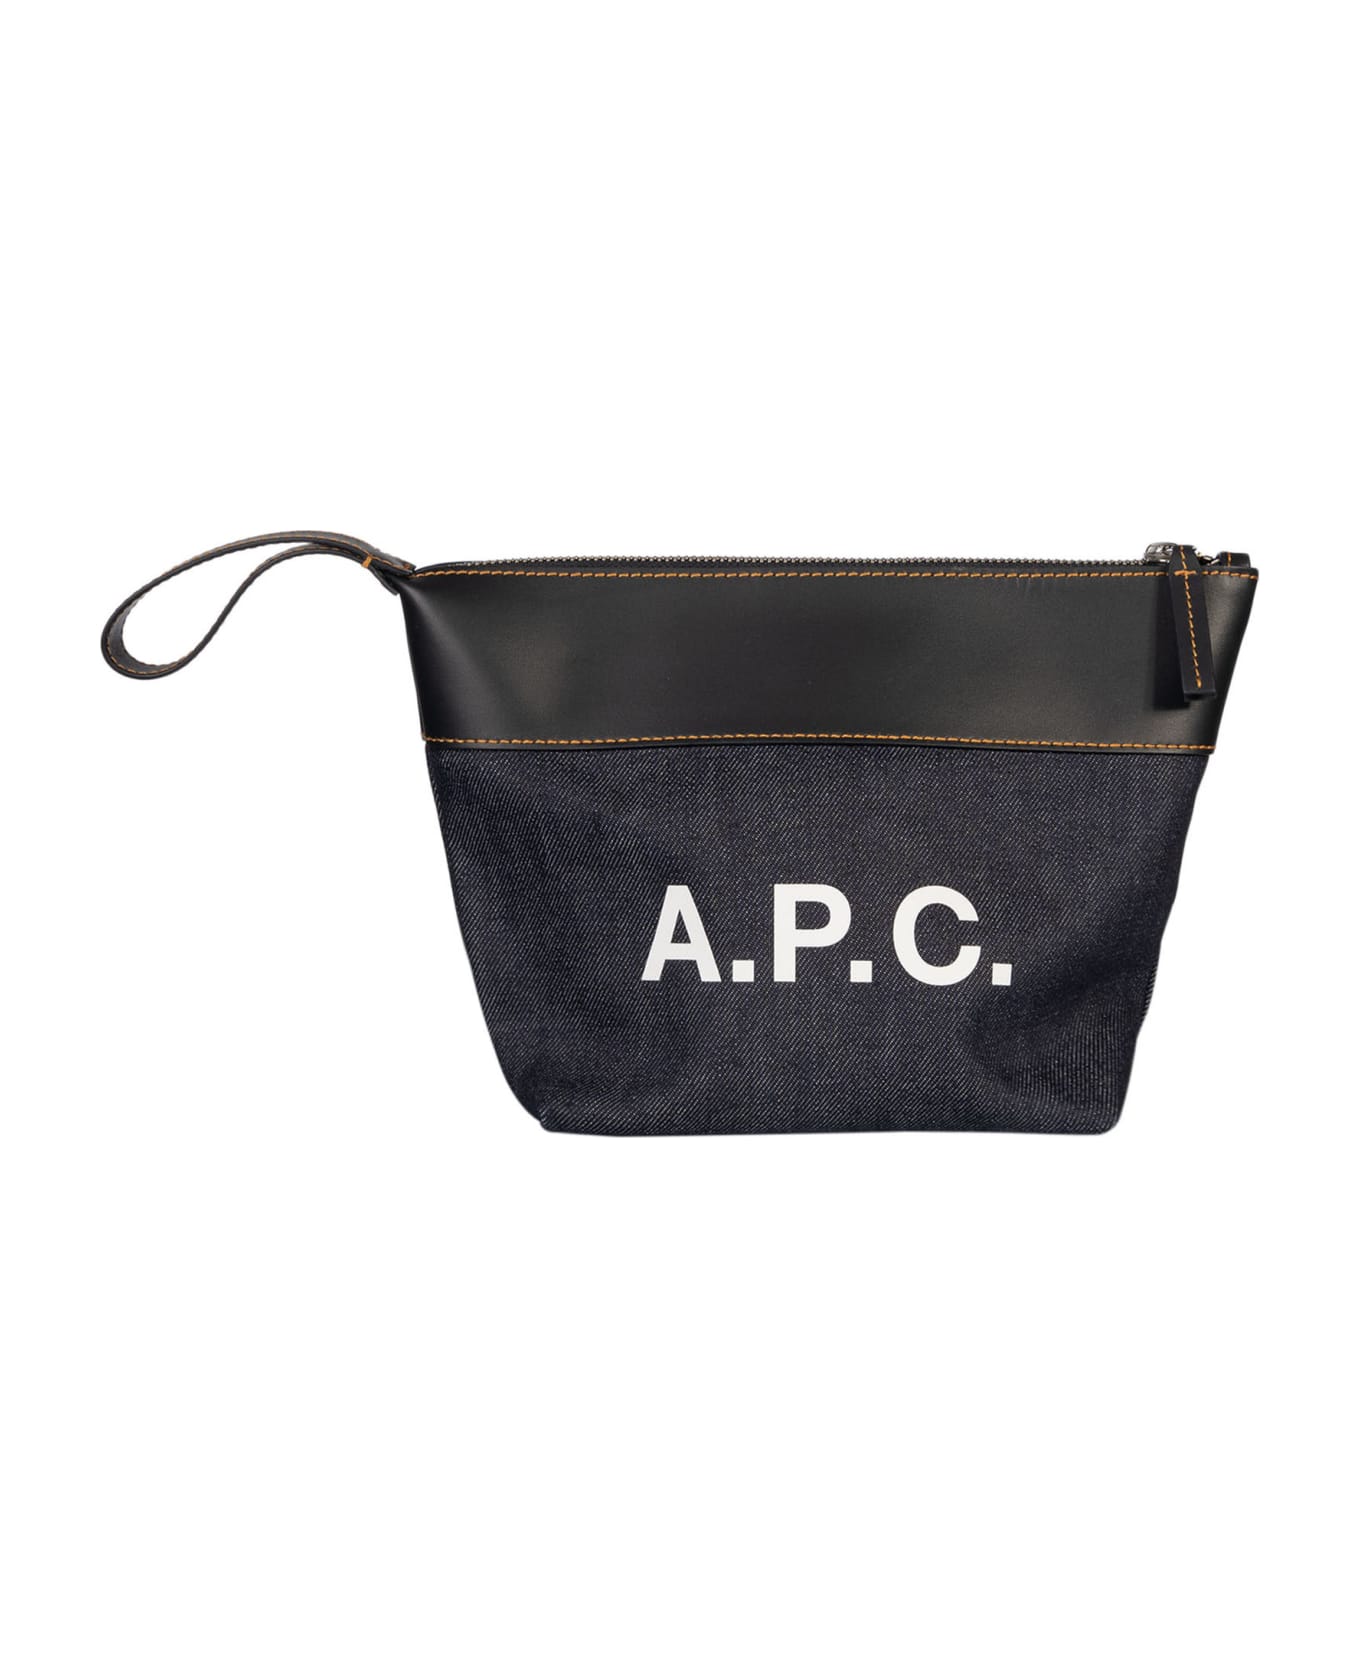 A.P.C. Beauty-case - Blue クラッチバッグ